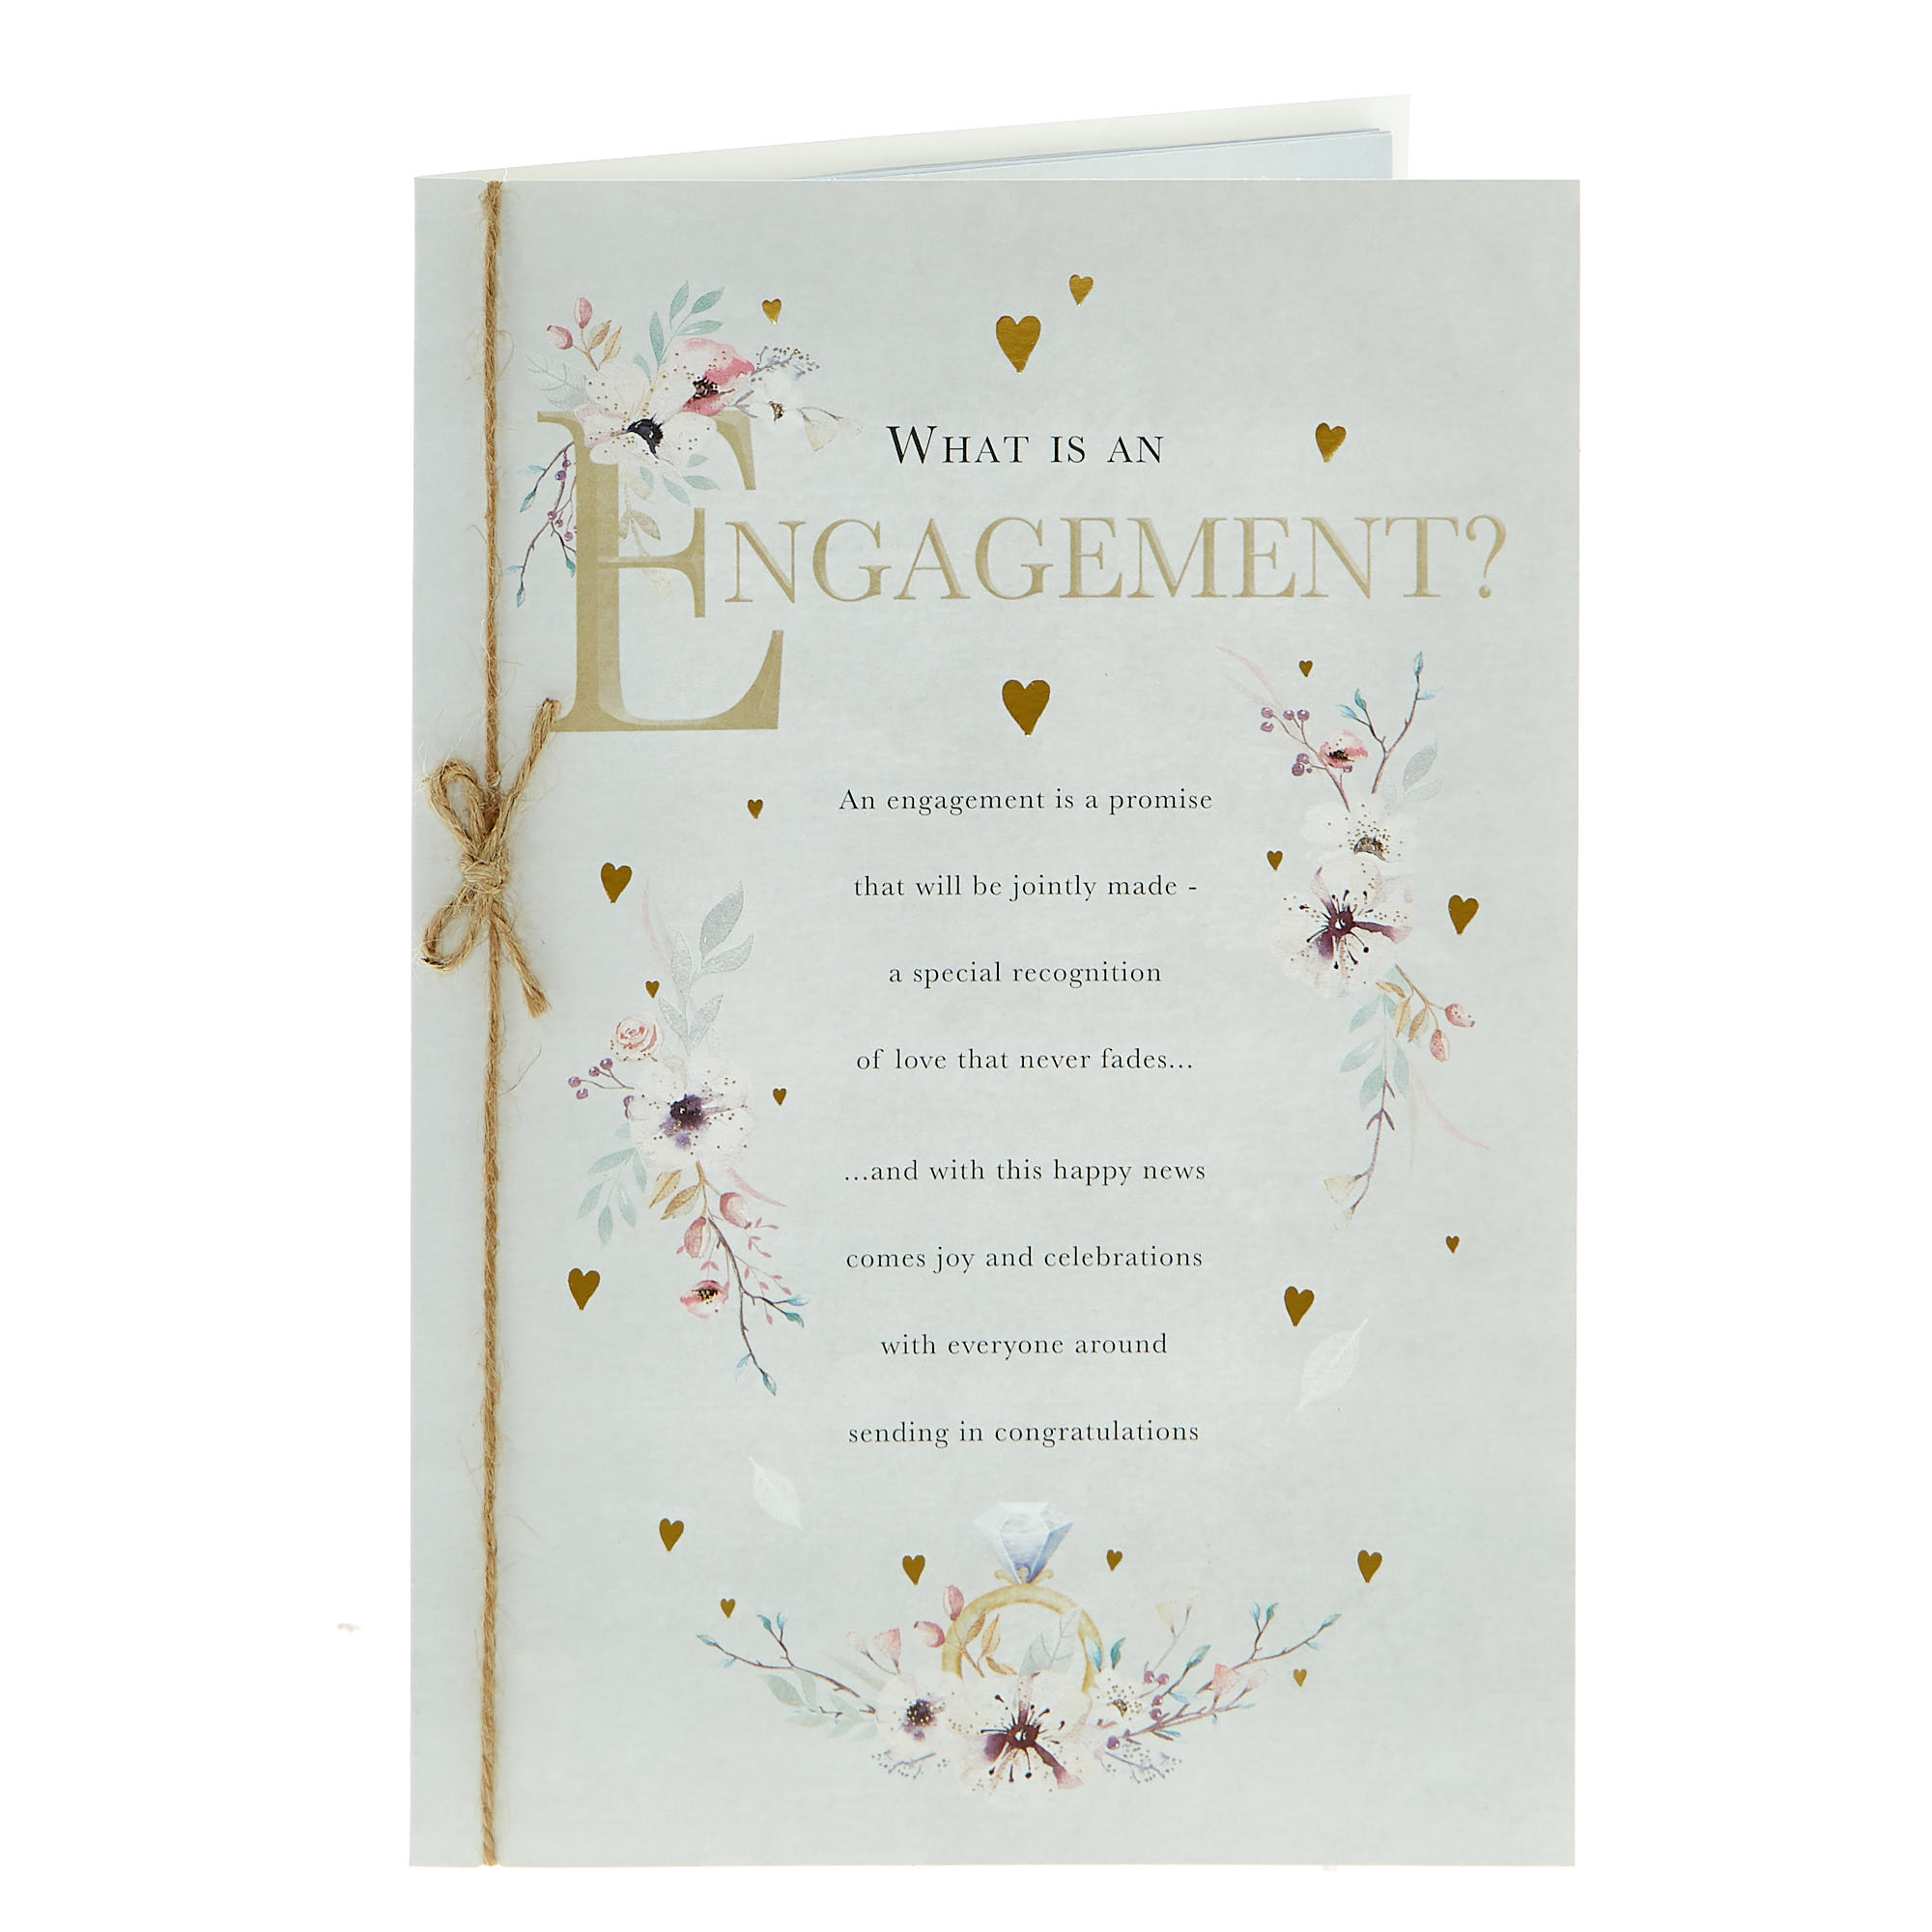 Engagement Card - What Is An Engagement?